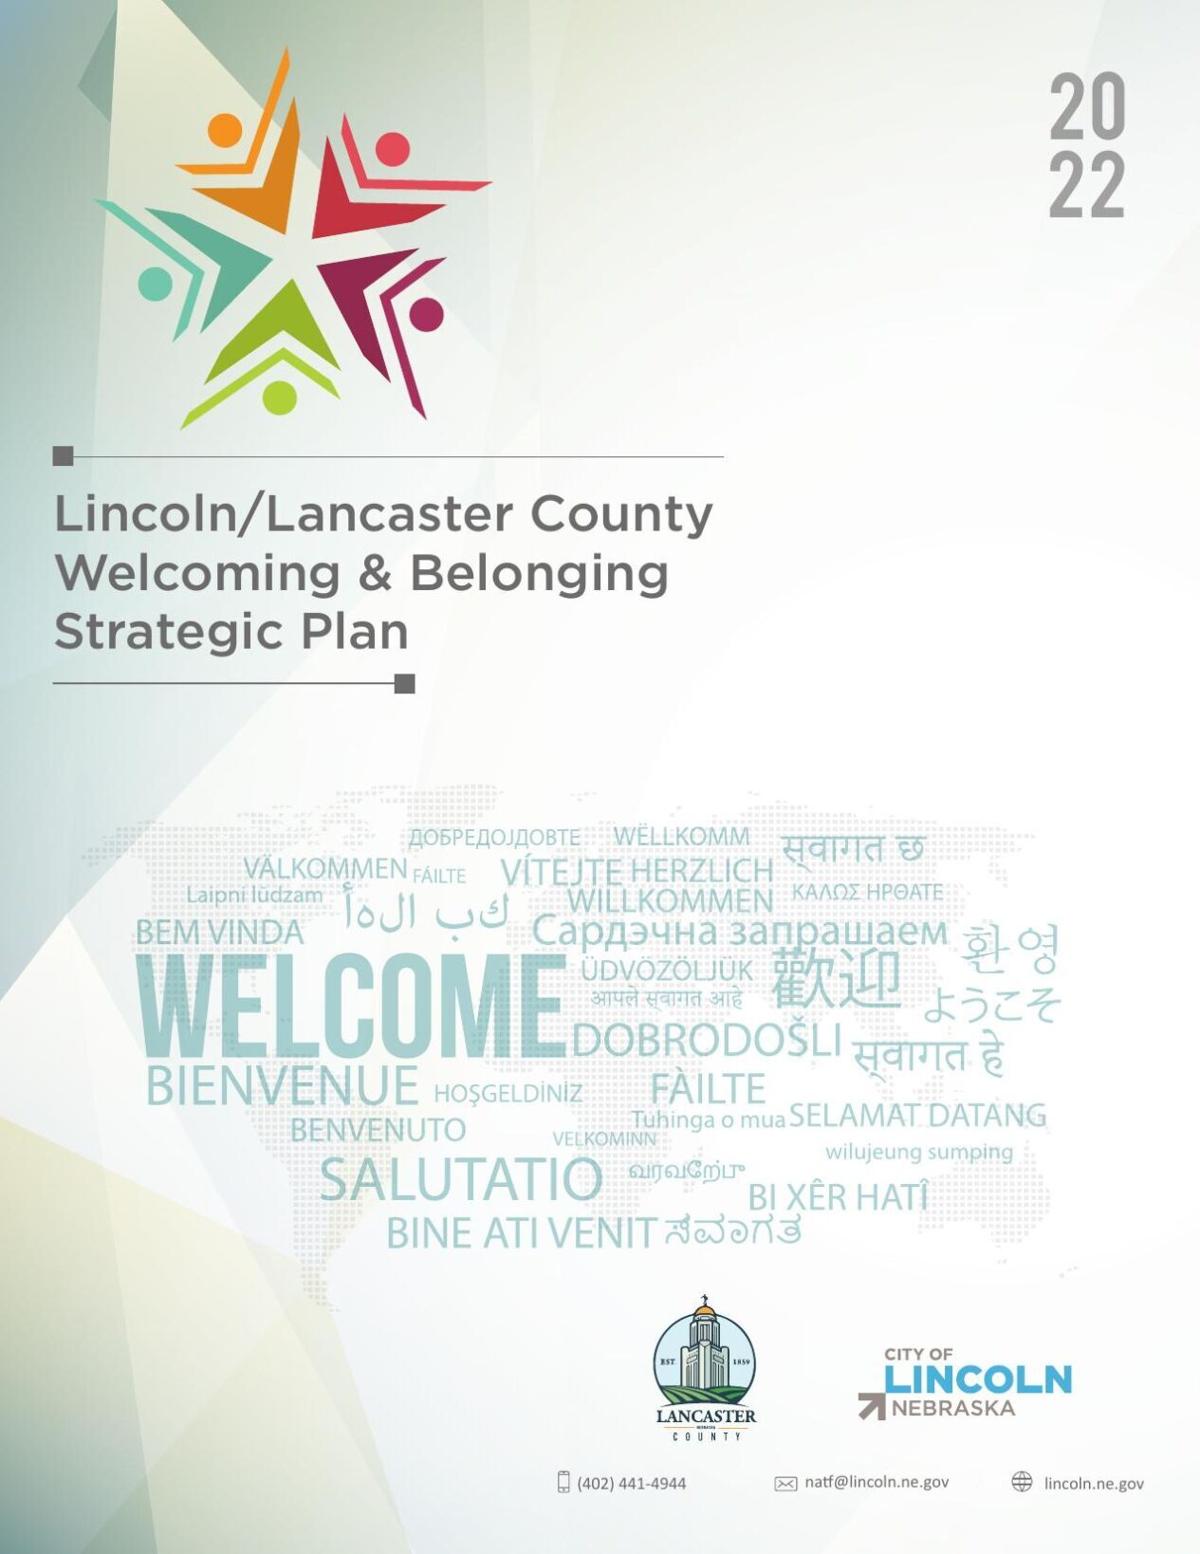 Read the Lincoln-Lancaster County welcoming plan